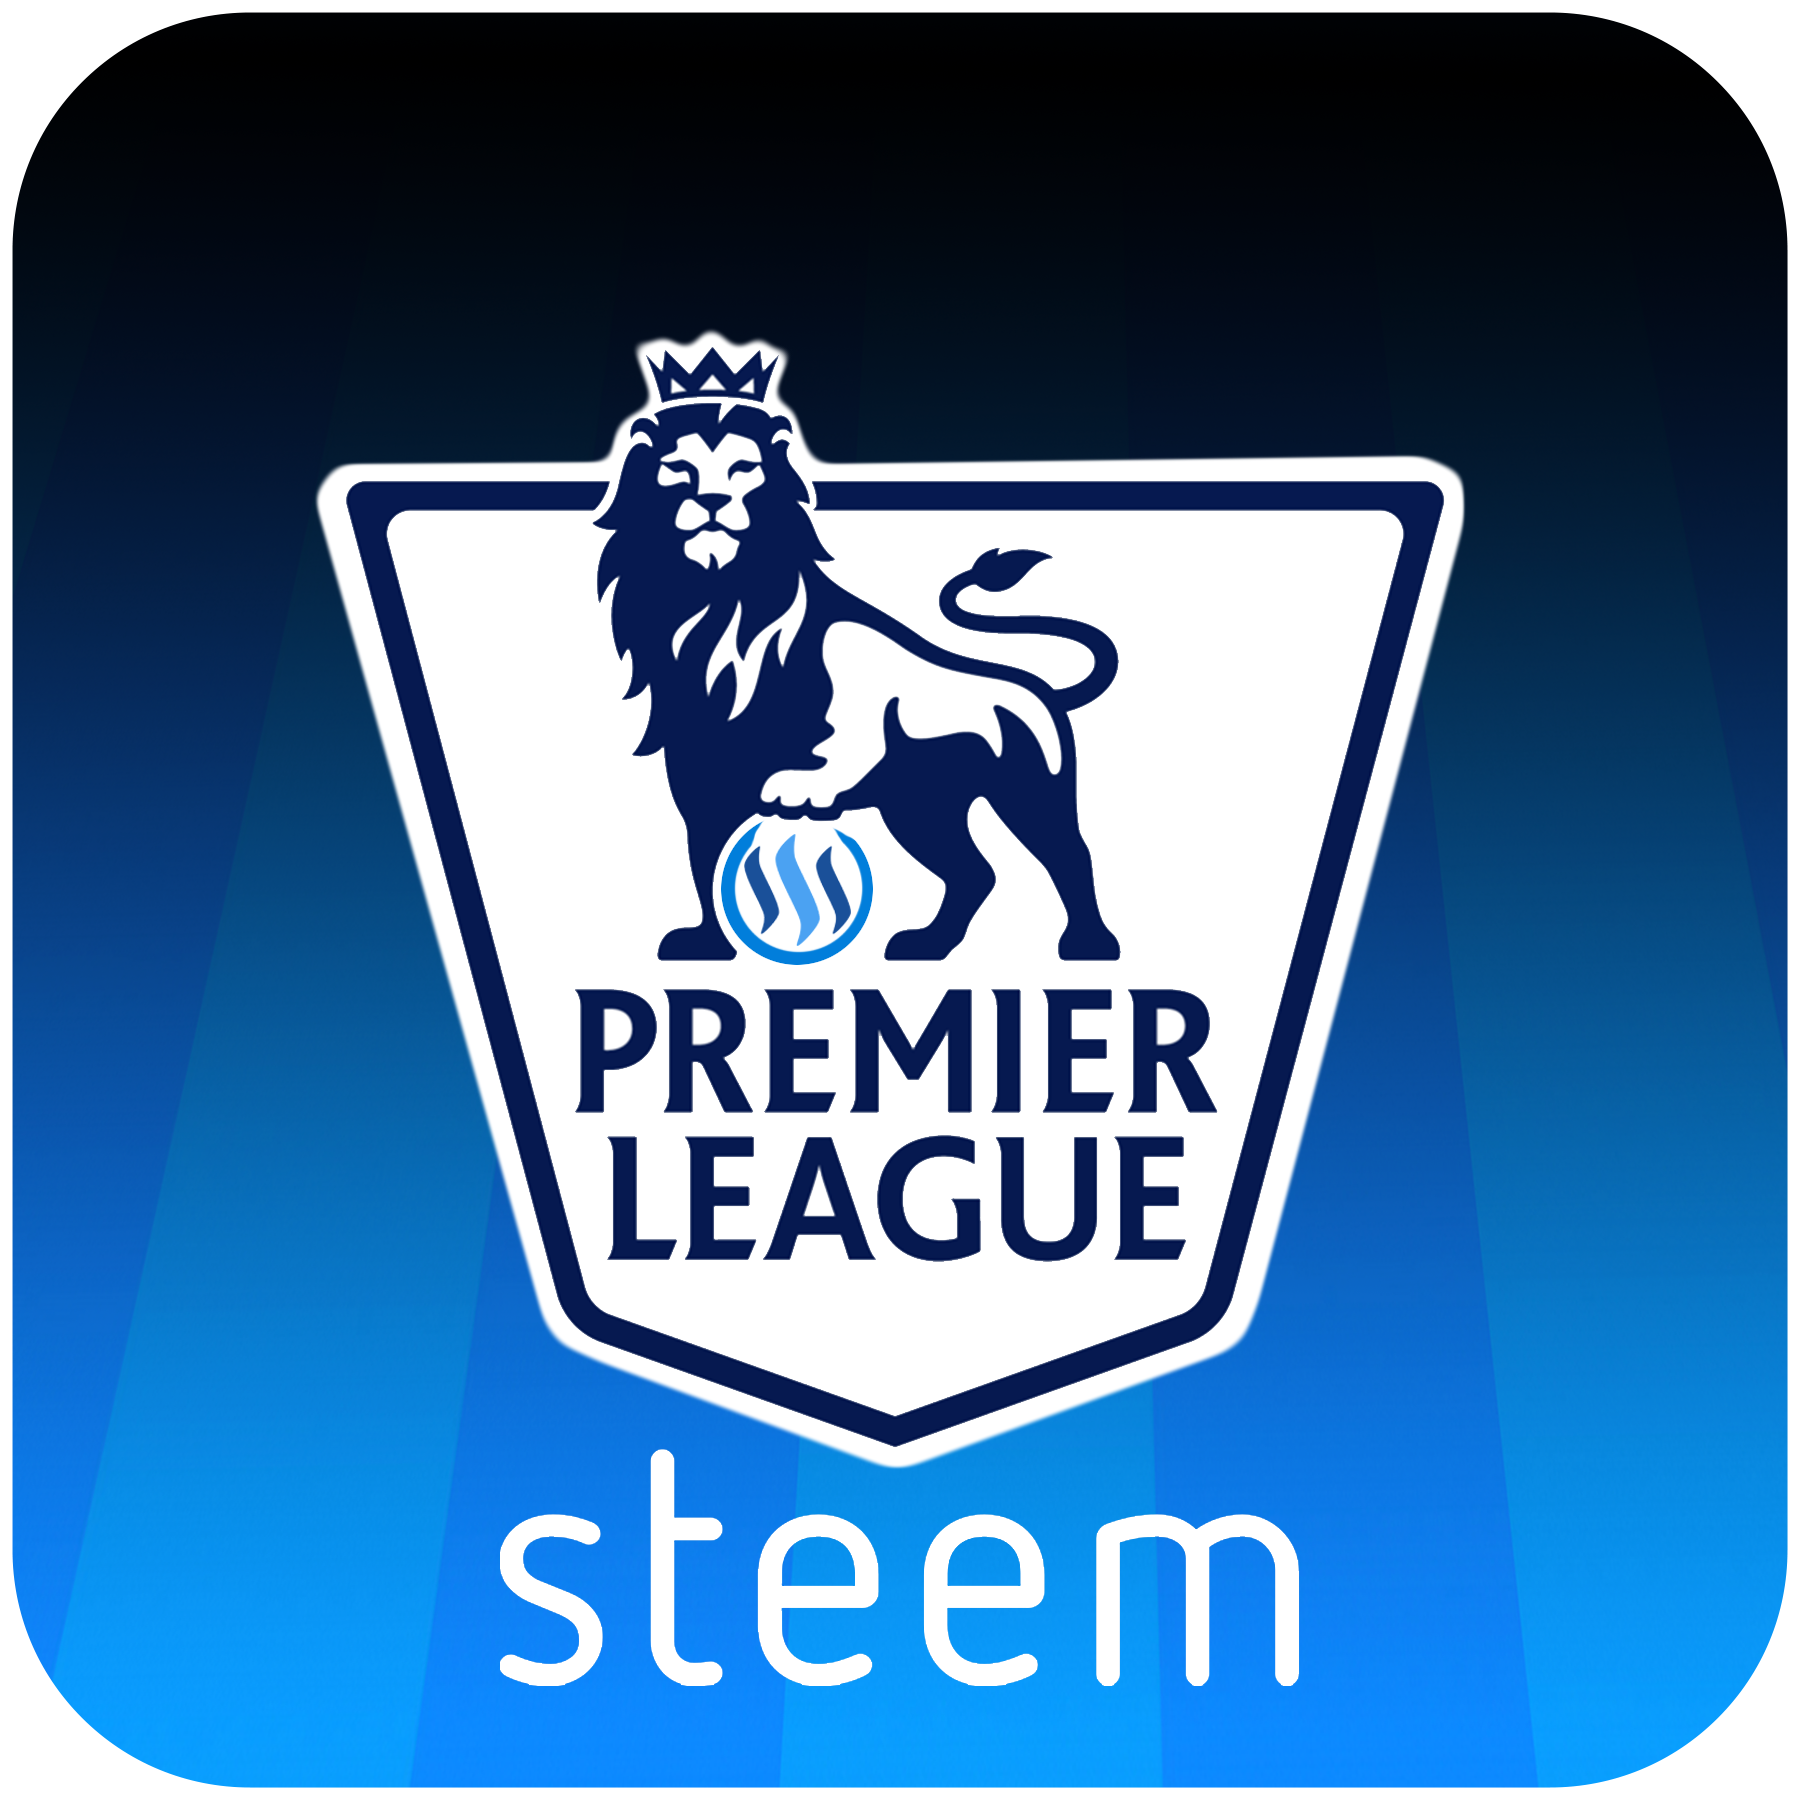 Steem Fantasy Premier League - Gameweek 32 Review and Match Prediction Game! — Steemkr1800 x 1800